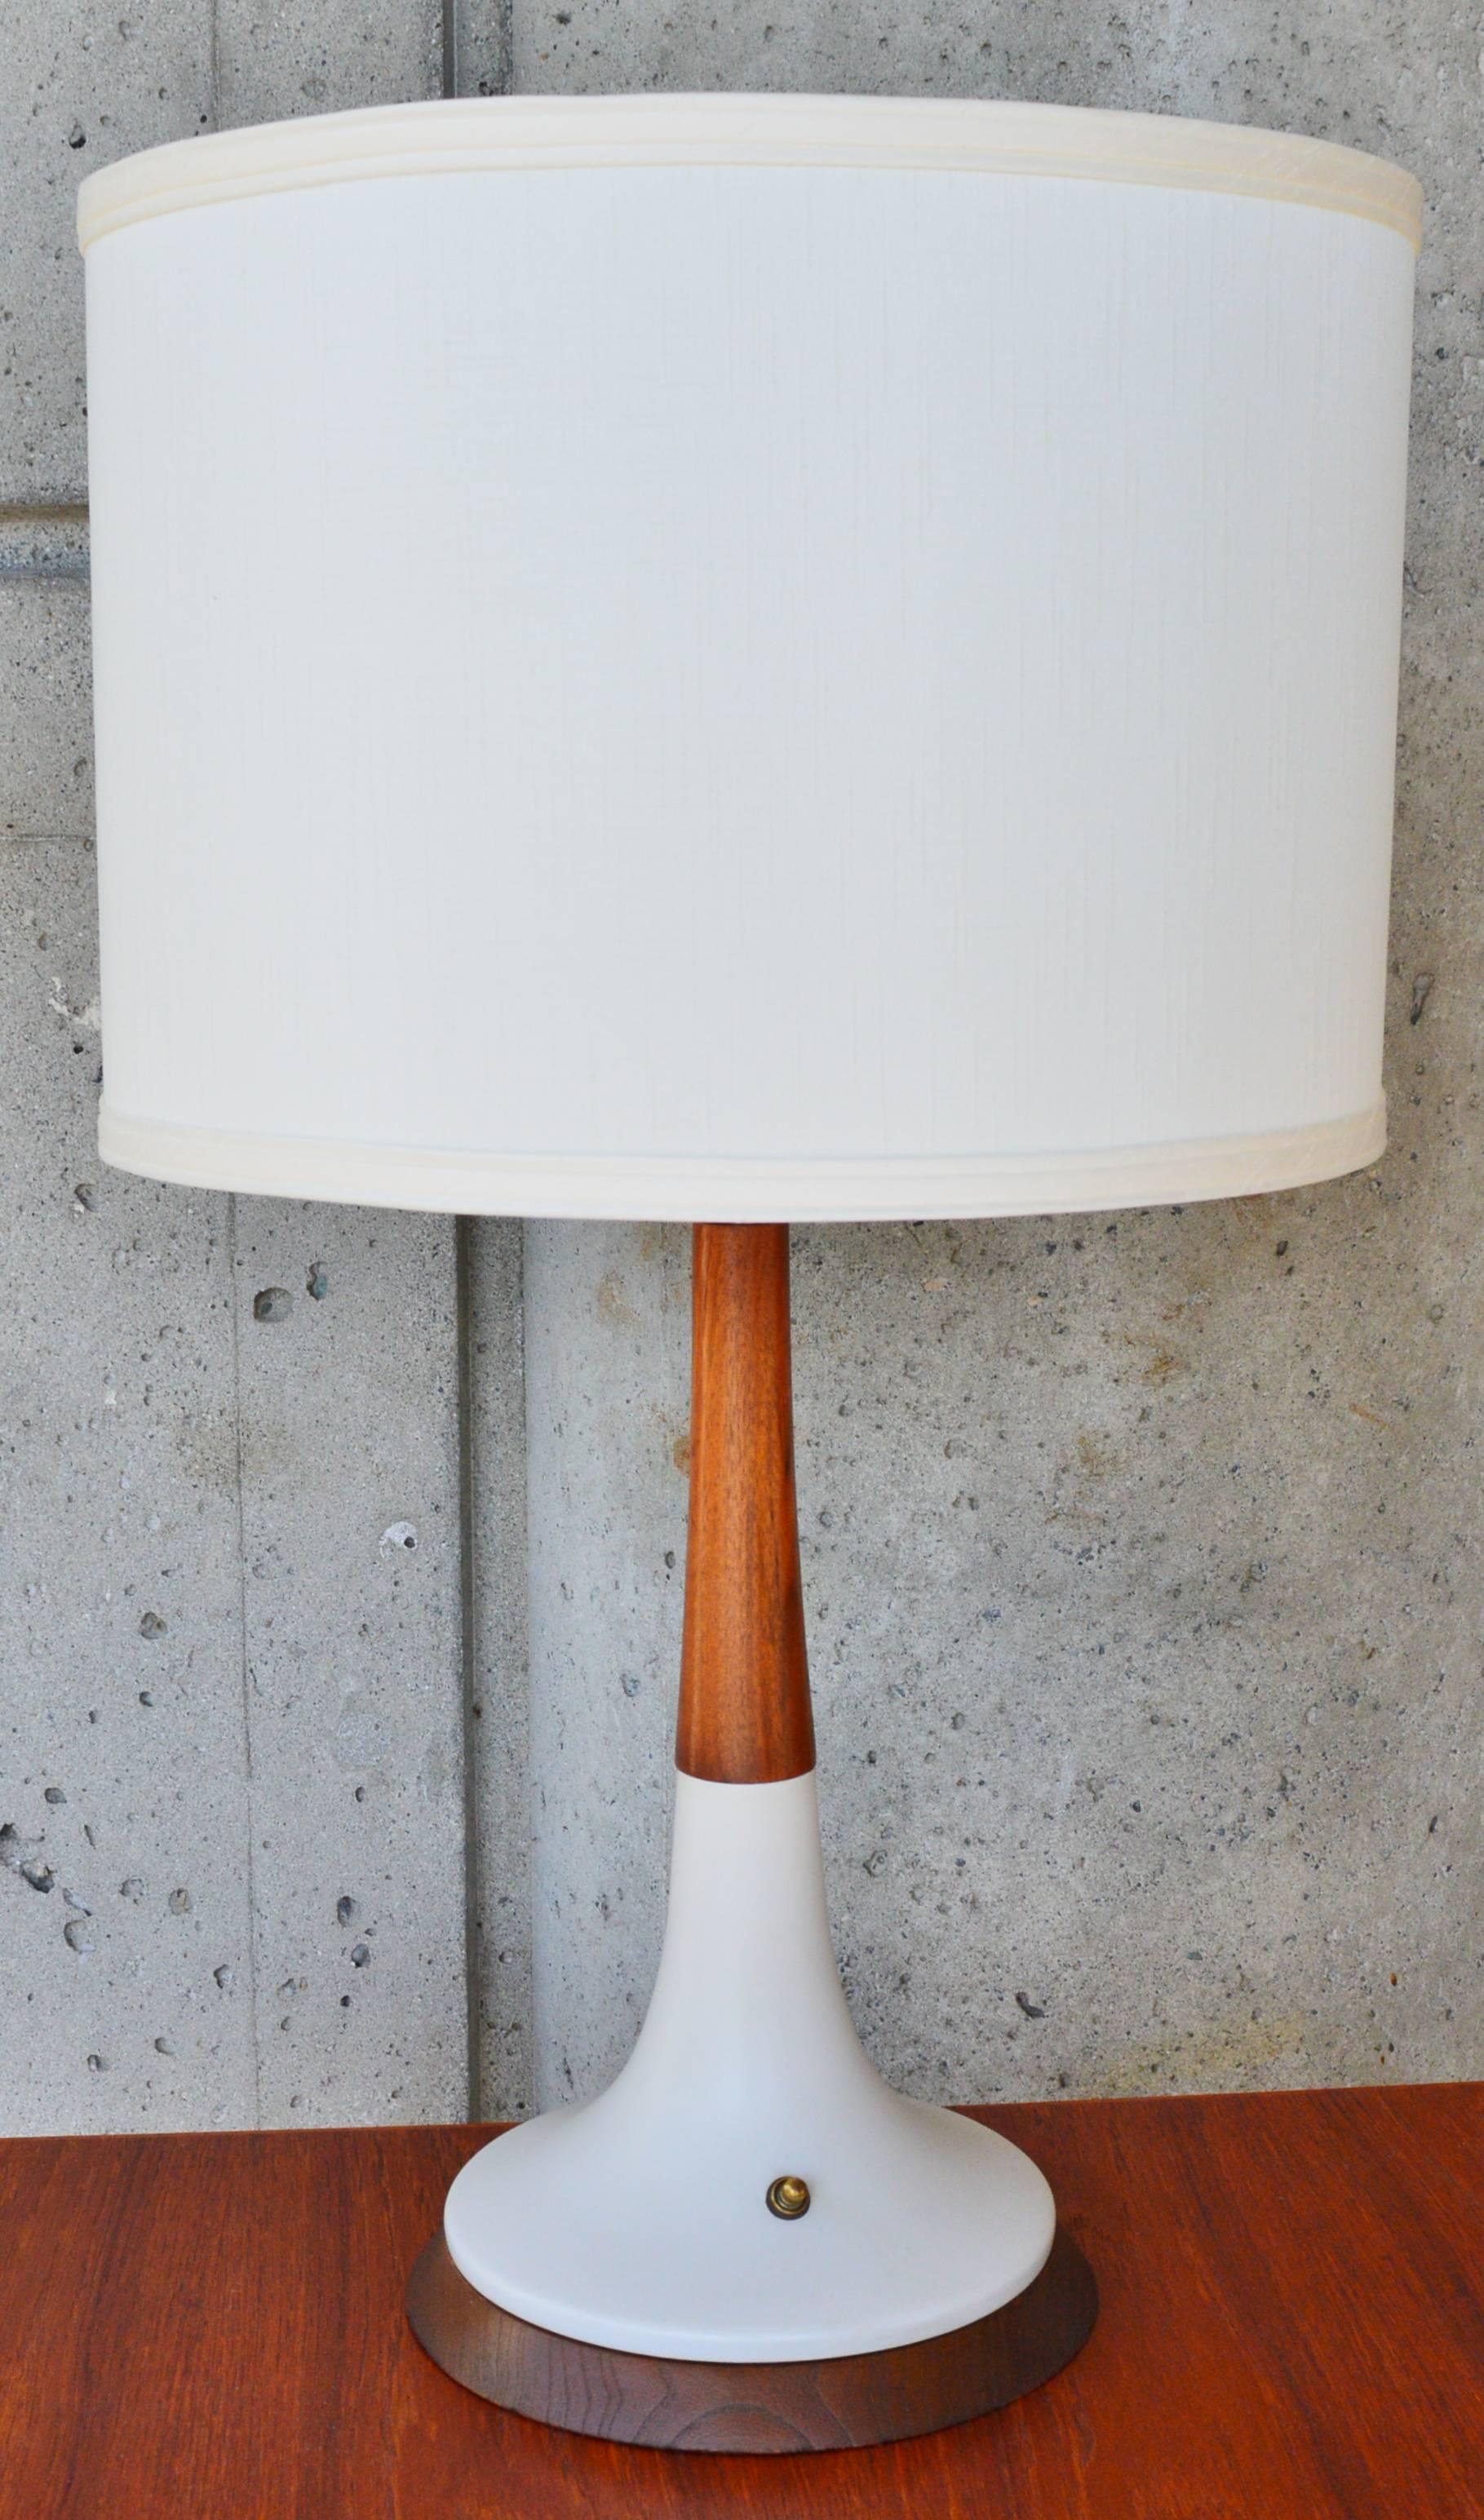 This lamp has lovely elegant lines, with a dramatic contrast between the cream ceramic body and the dark walnut flared base and the teak tapering stem. Minor flea bites around the base, otherwise in excellent condition. Rare to have the switch on